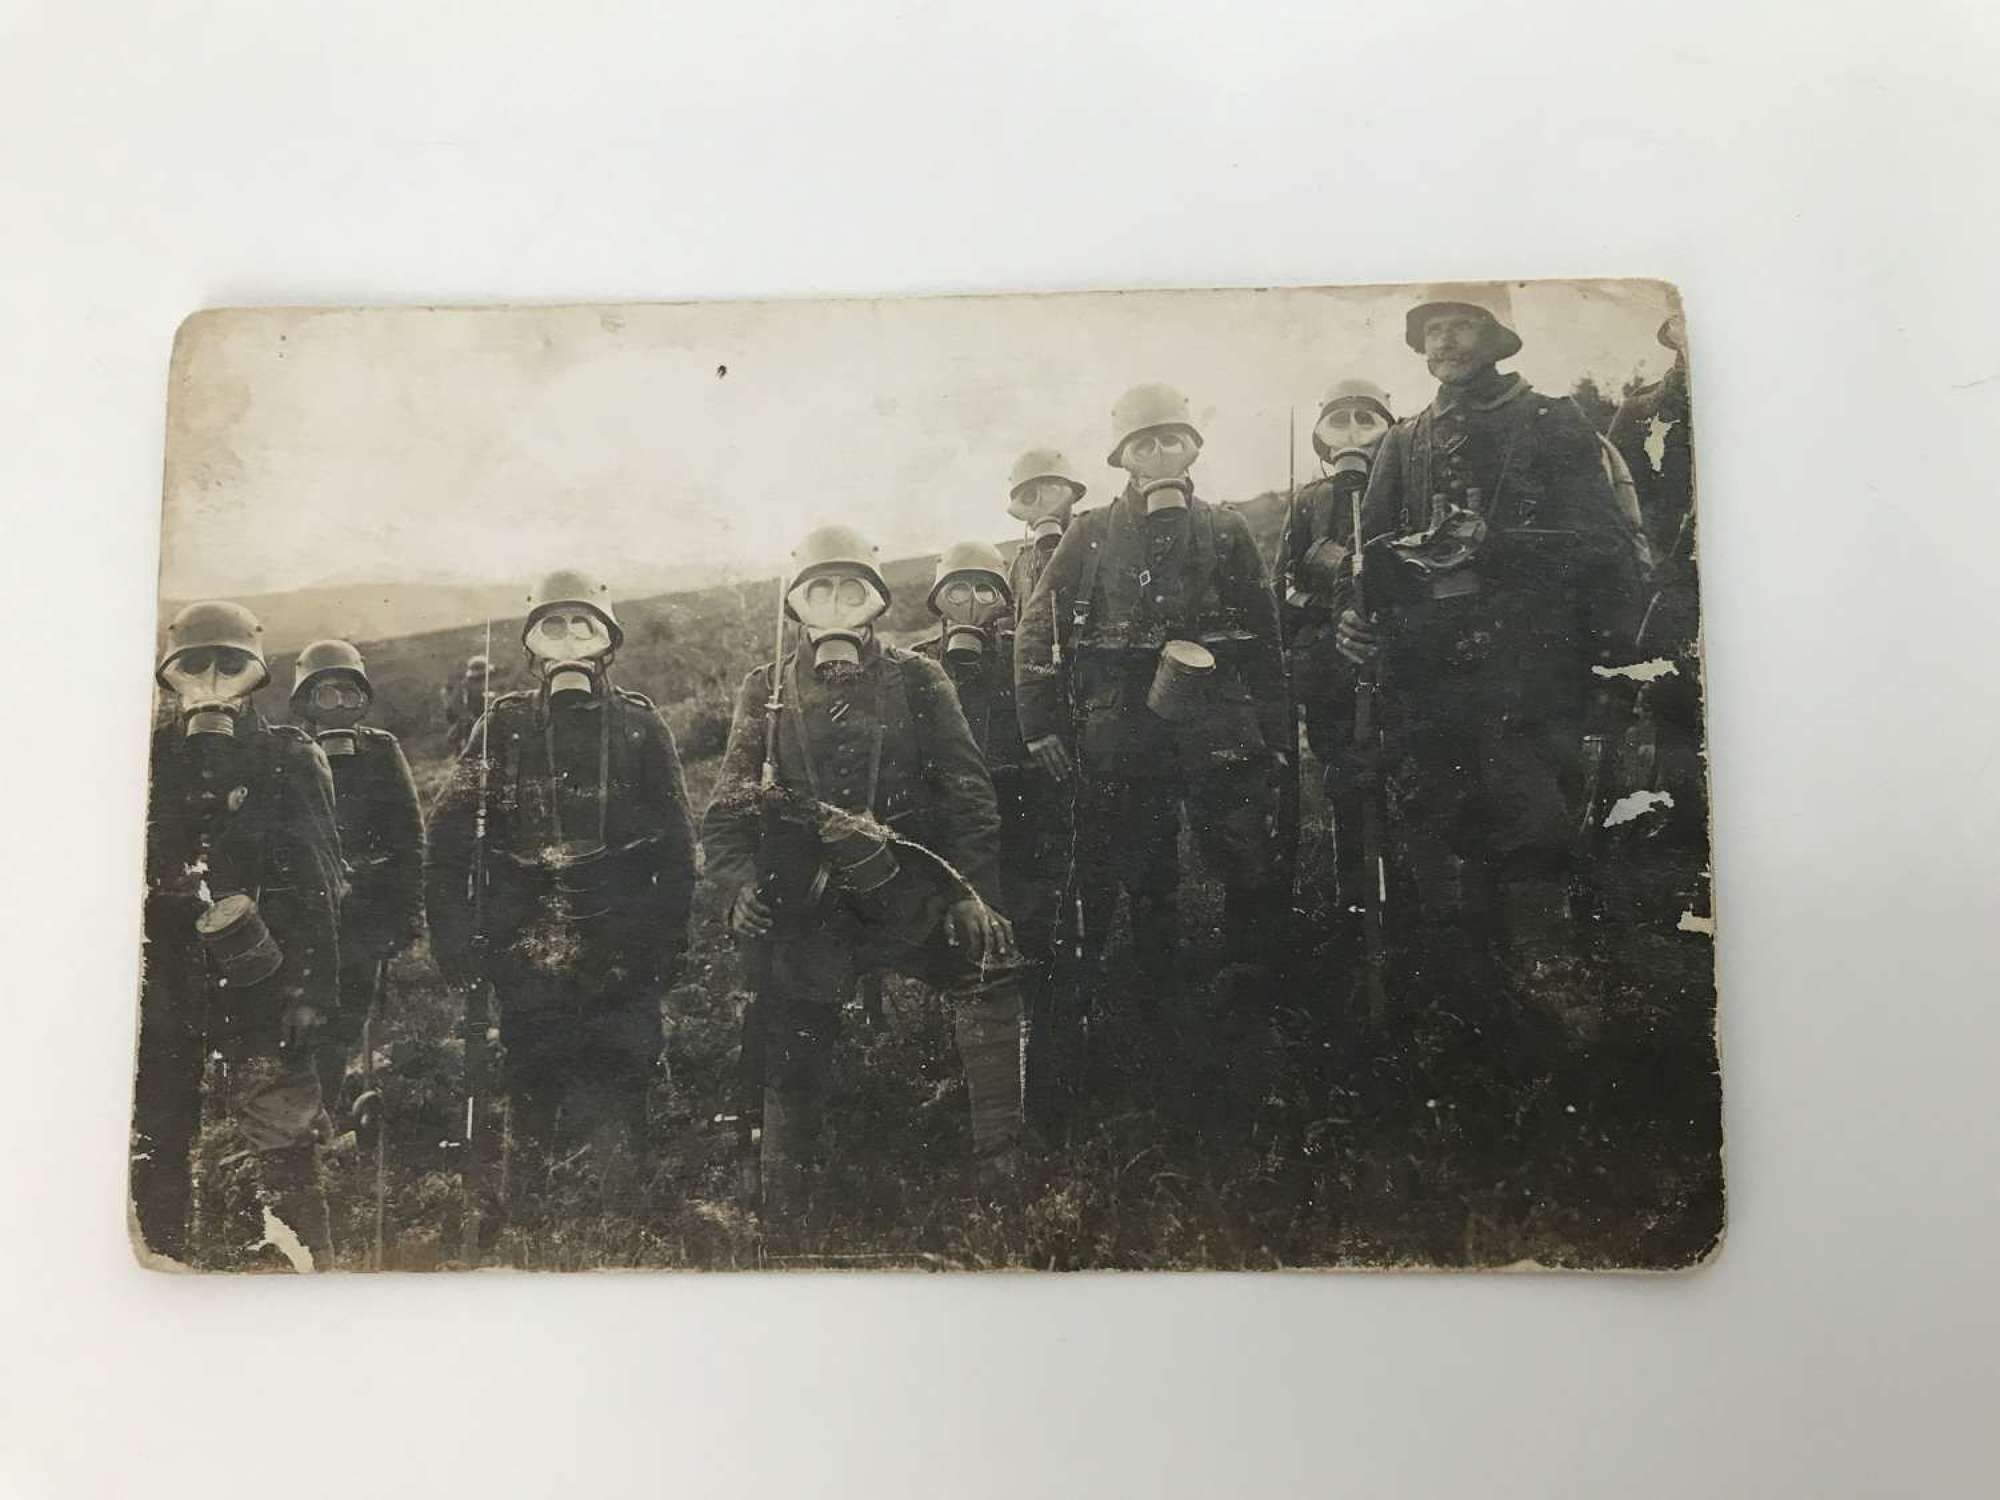 Postcard image of German trench raiding party